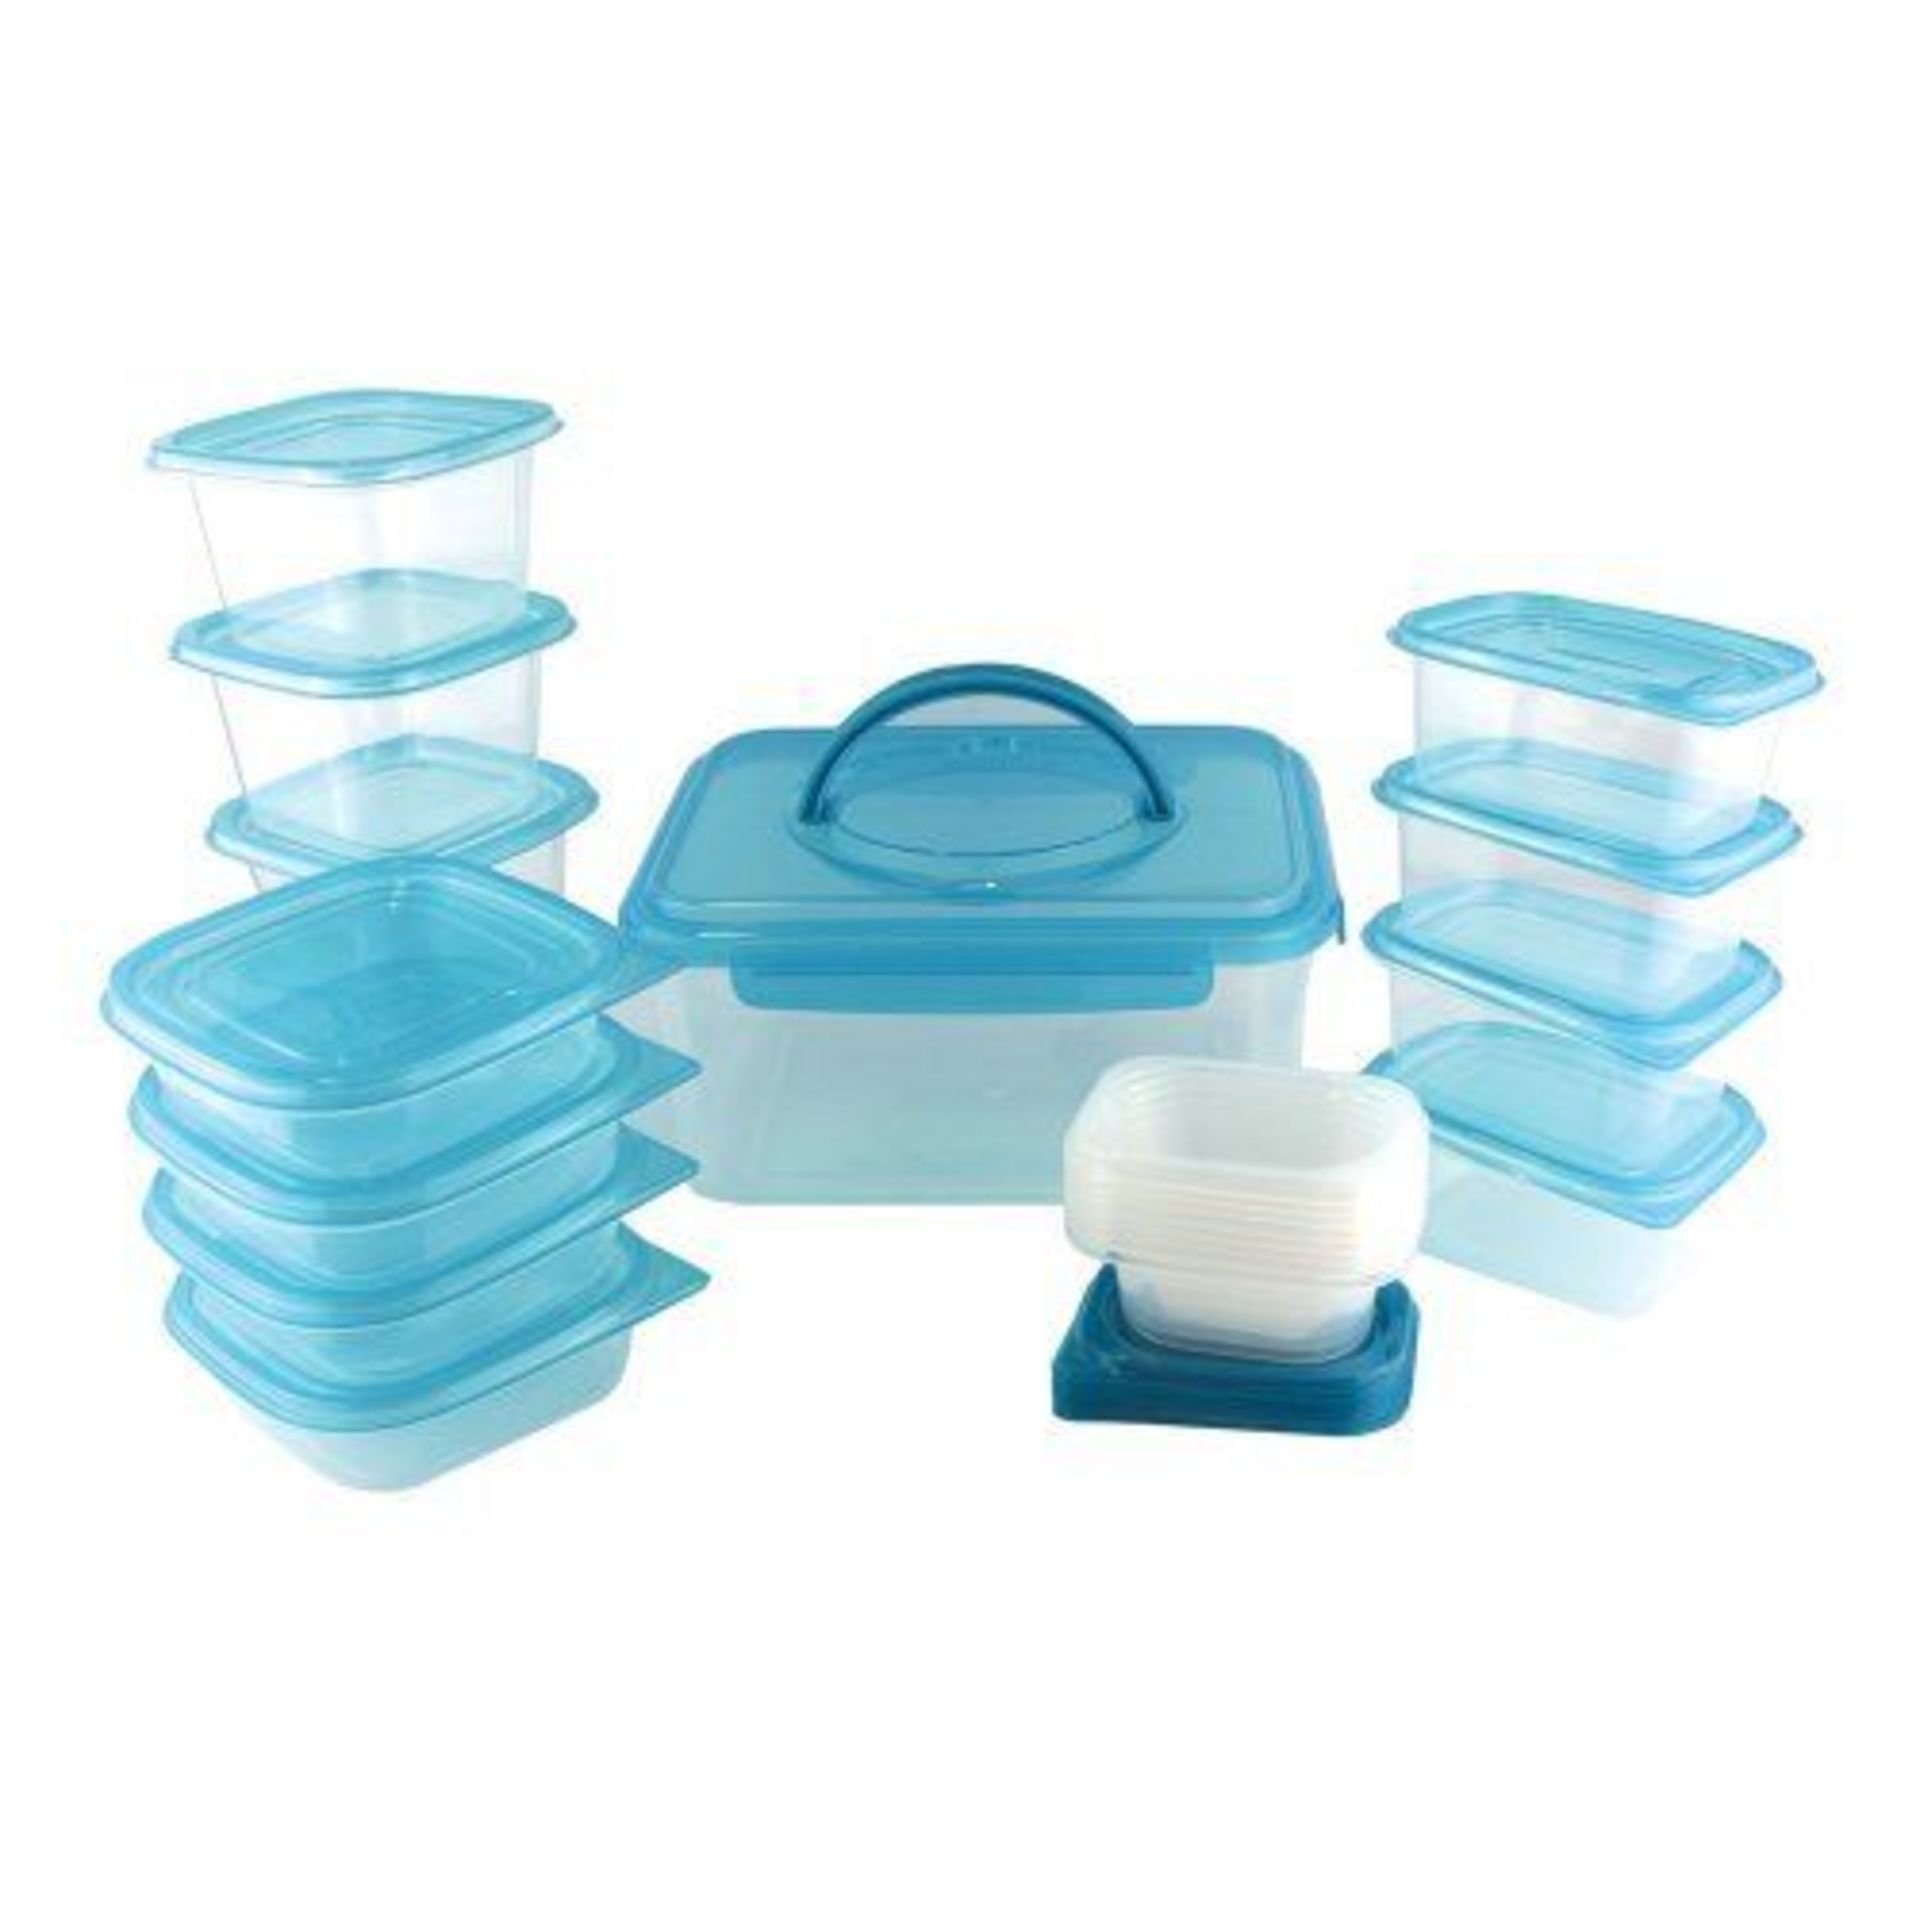 V *TRADE QTY* Brand New 21 Piece Cake Decorating And Storage Kit (Pink Trim) RRP 19.99 X 3 YOUR